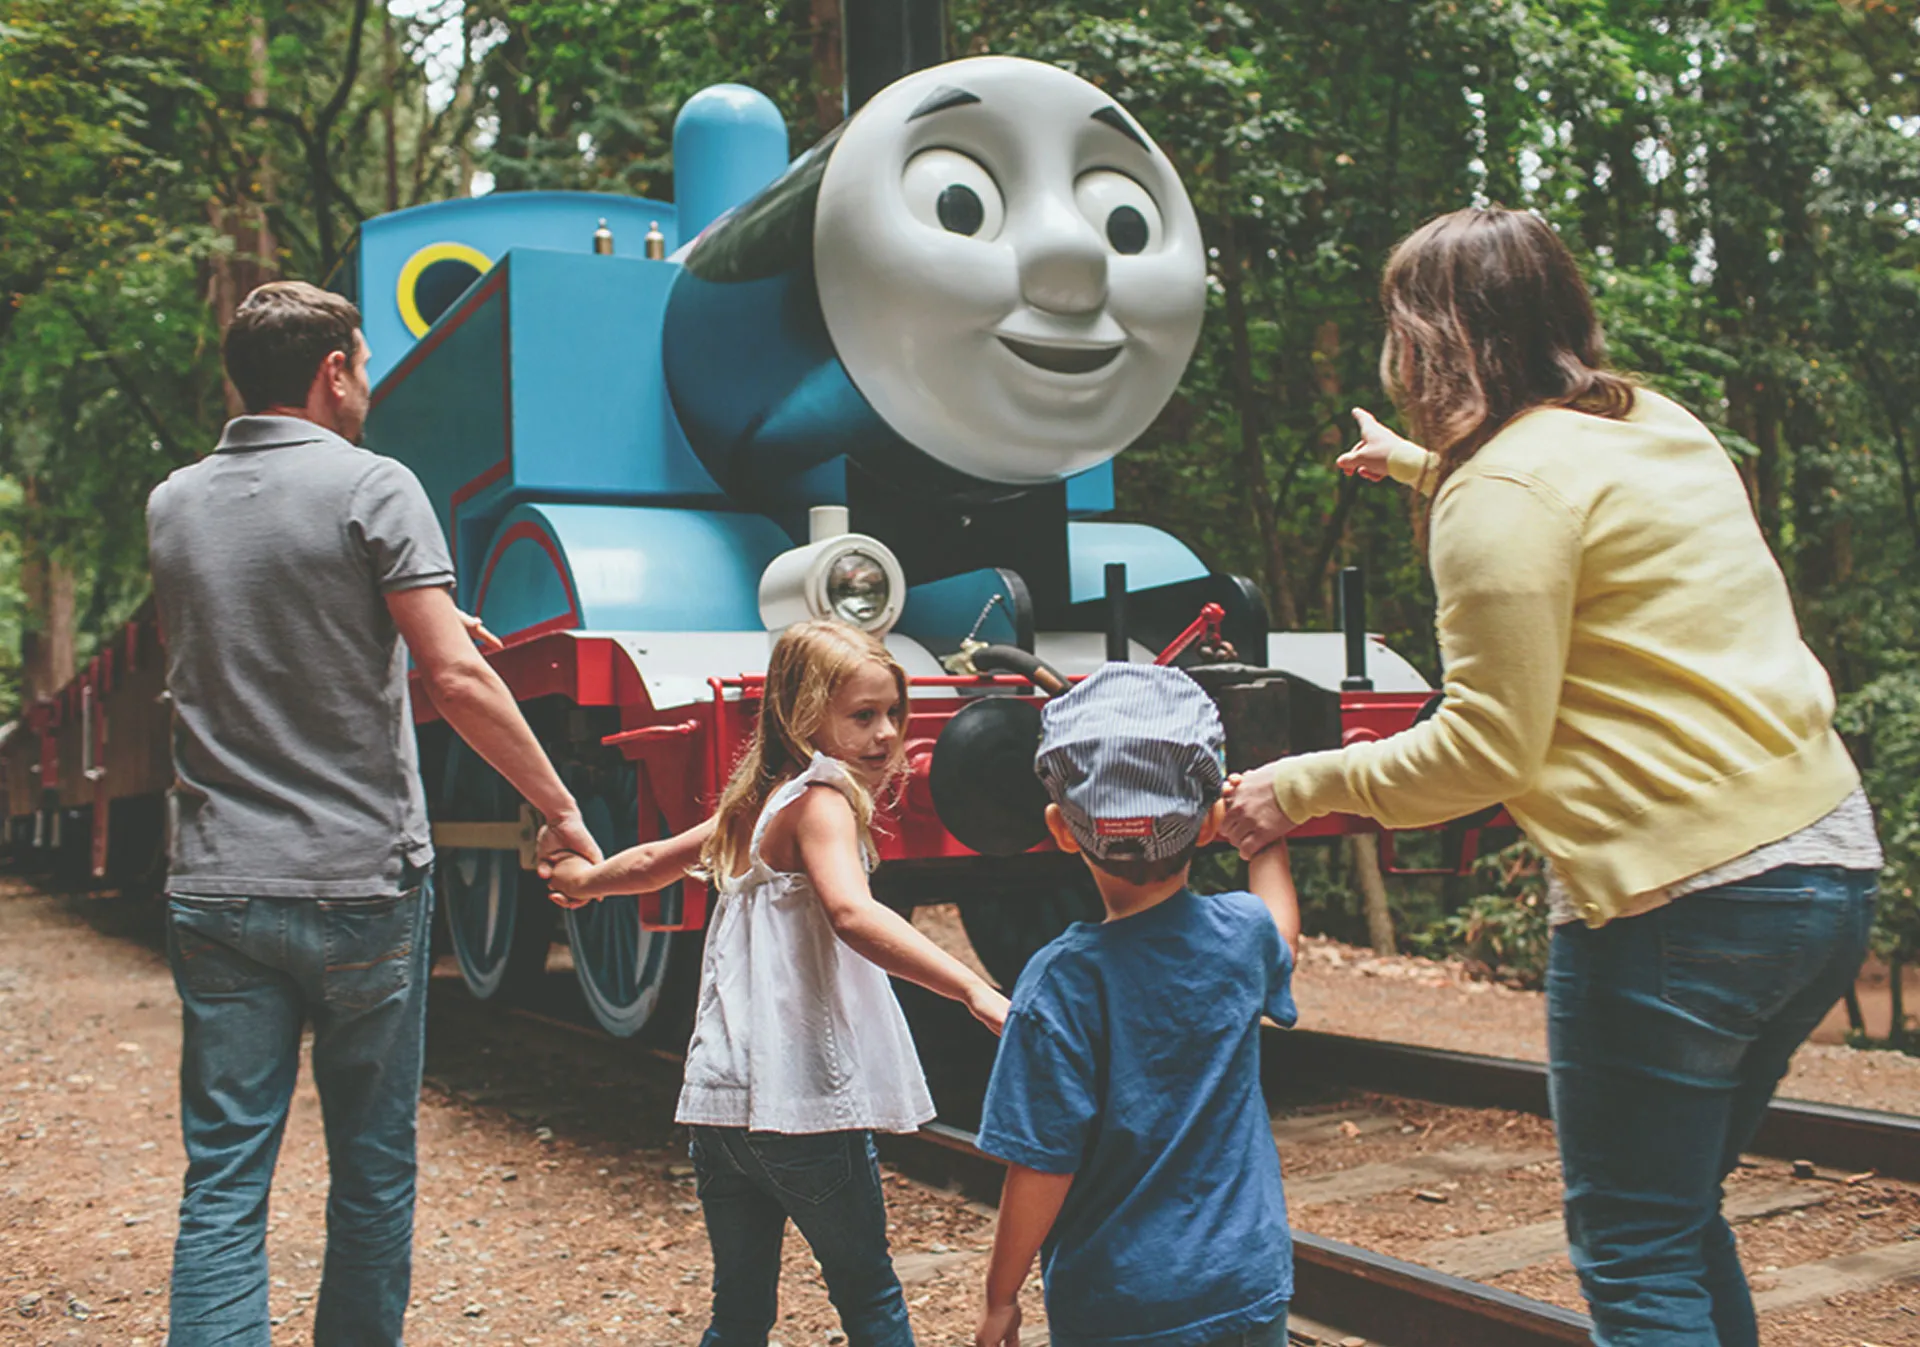 Visit Thomas the Tank Engine in May